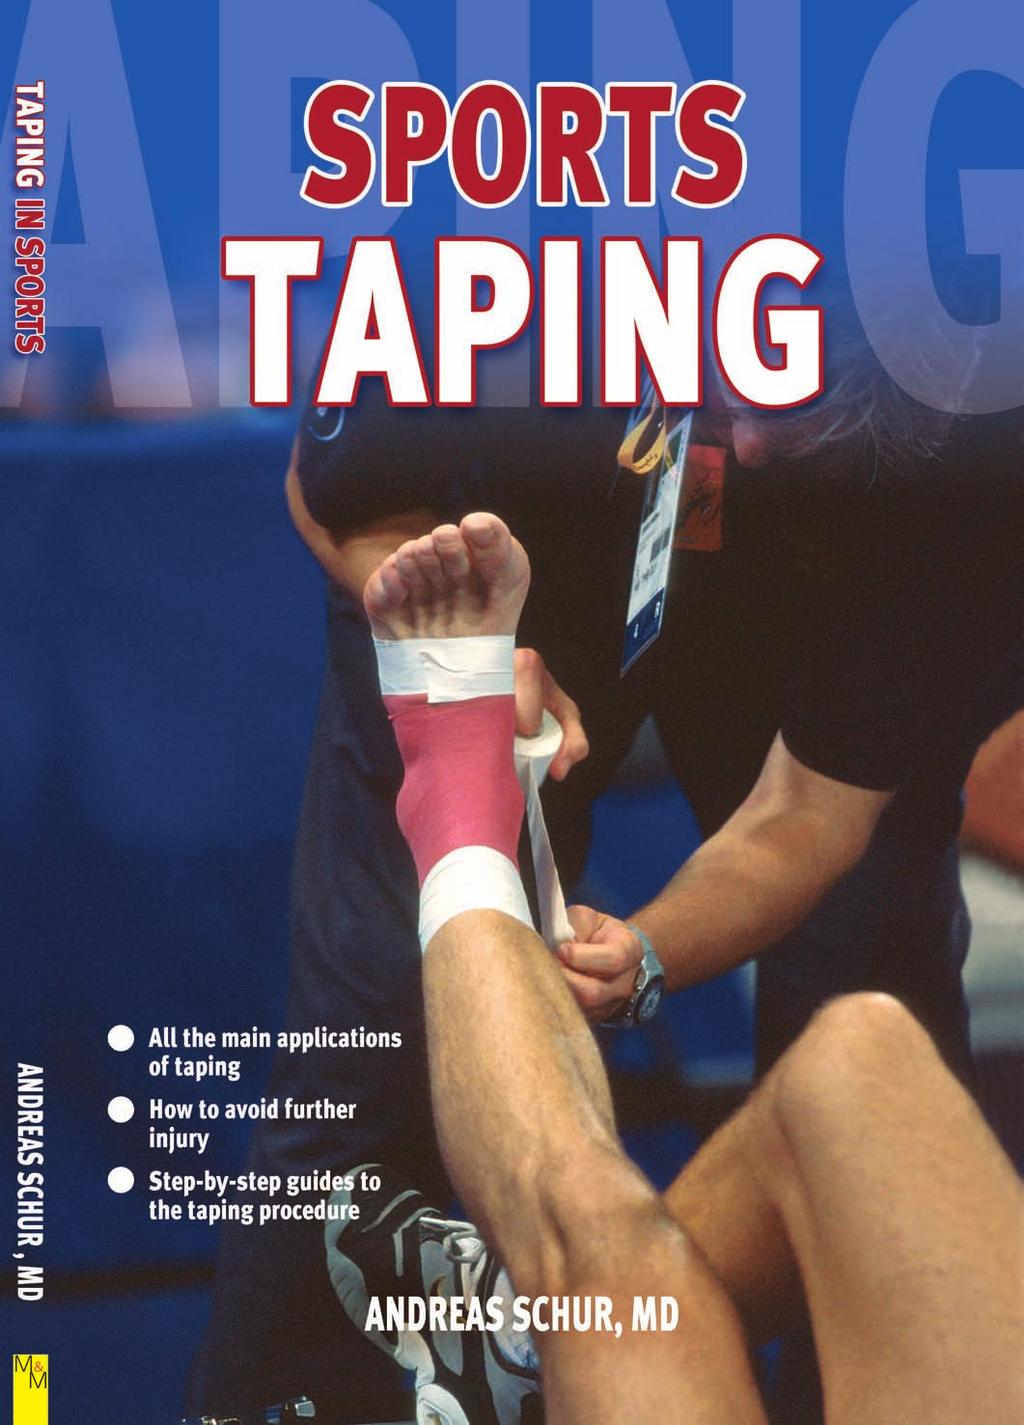 The advantage of taping over complete rest is obvious: metabolic activity